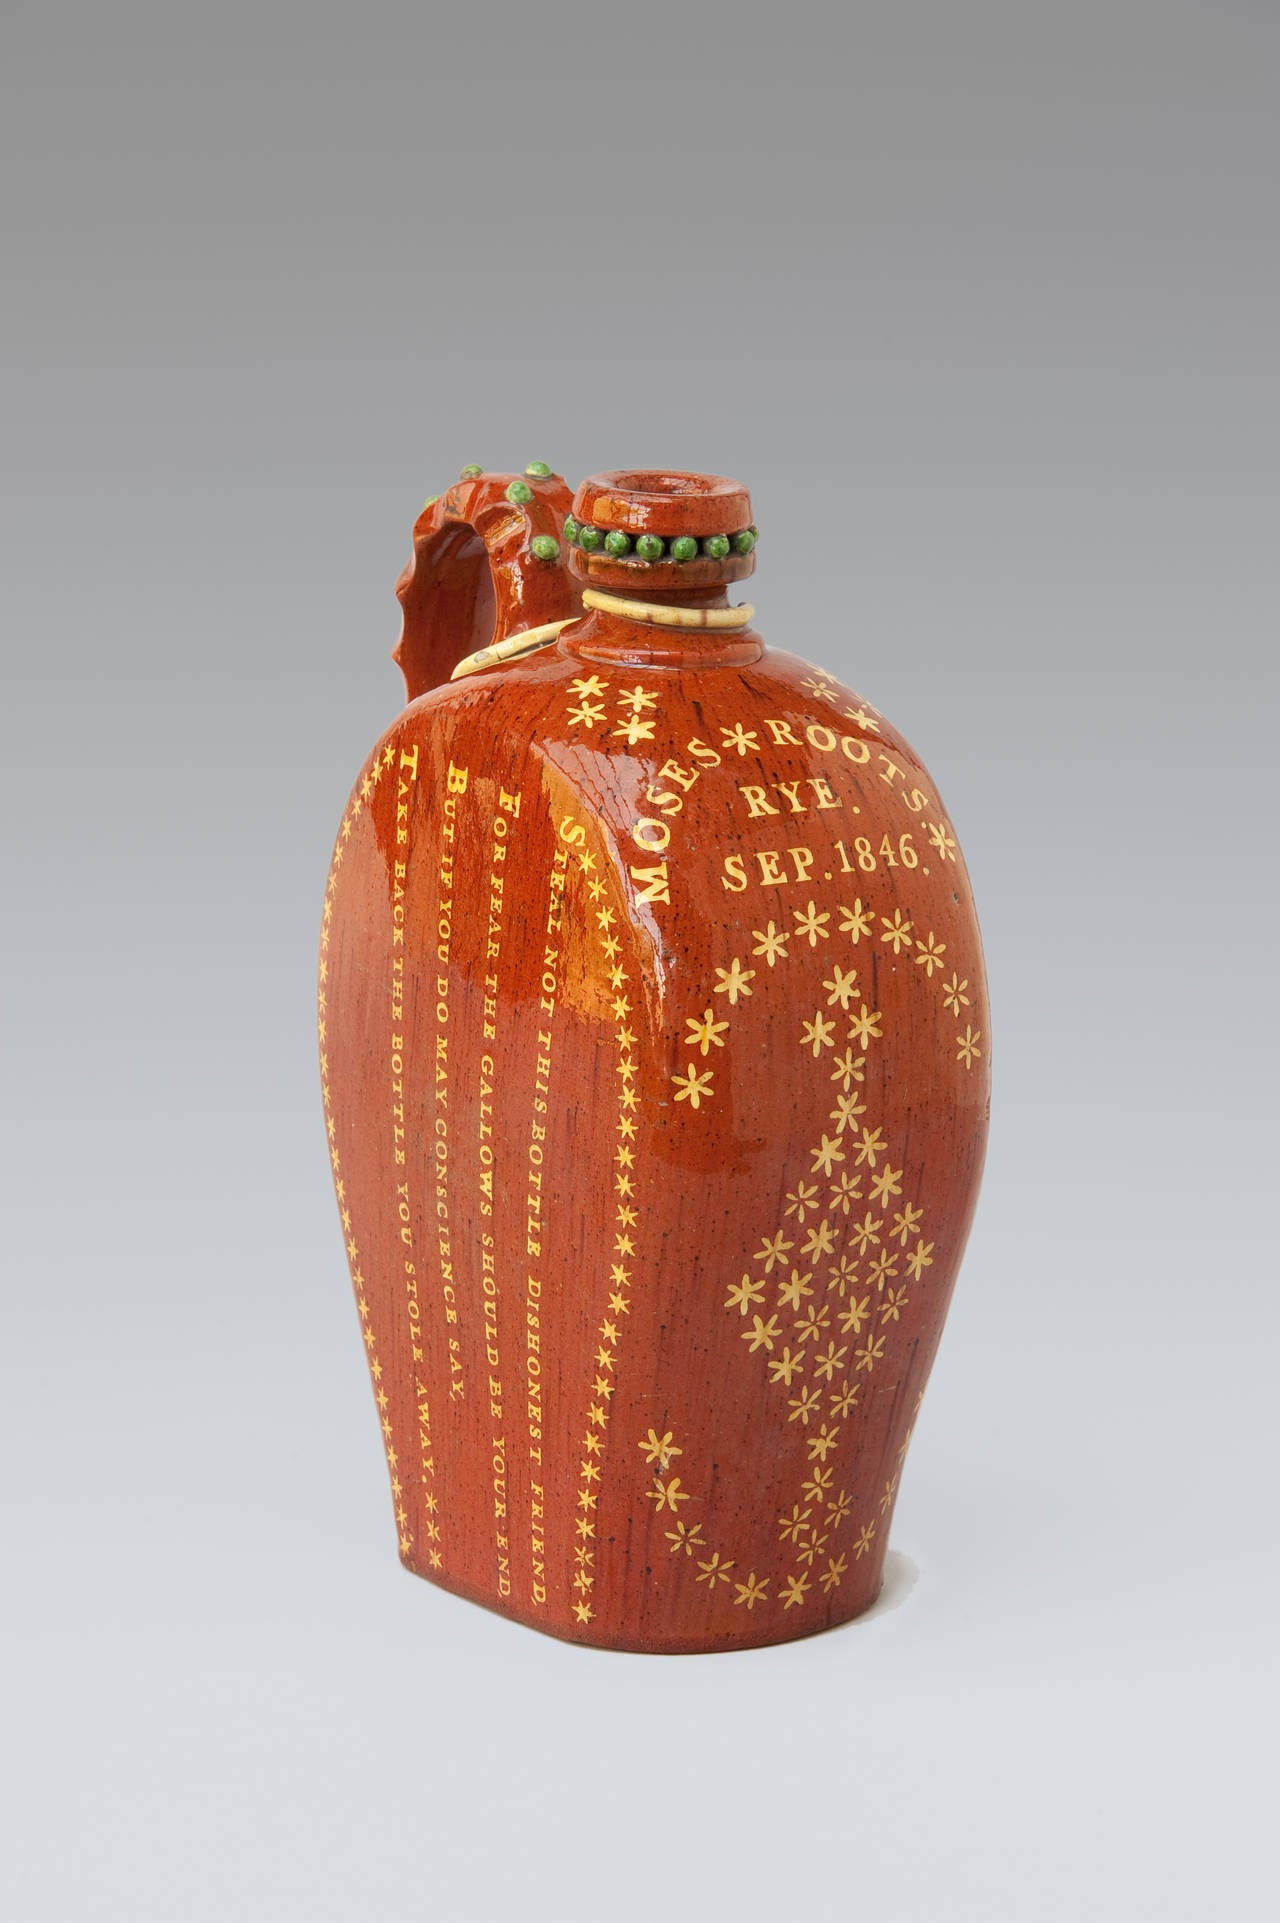 Folk Art harvest flagons such as this were filled with beer or cider to quench the thirst of workers in the fields. The dedicatee of this antique slipware flagon was known to have been an agricultural worker. Though surely as this particular example